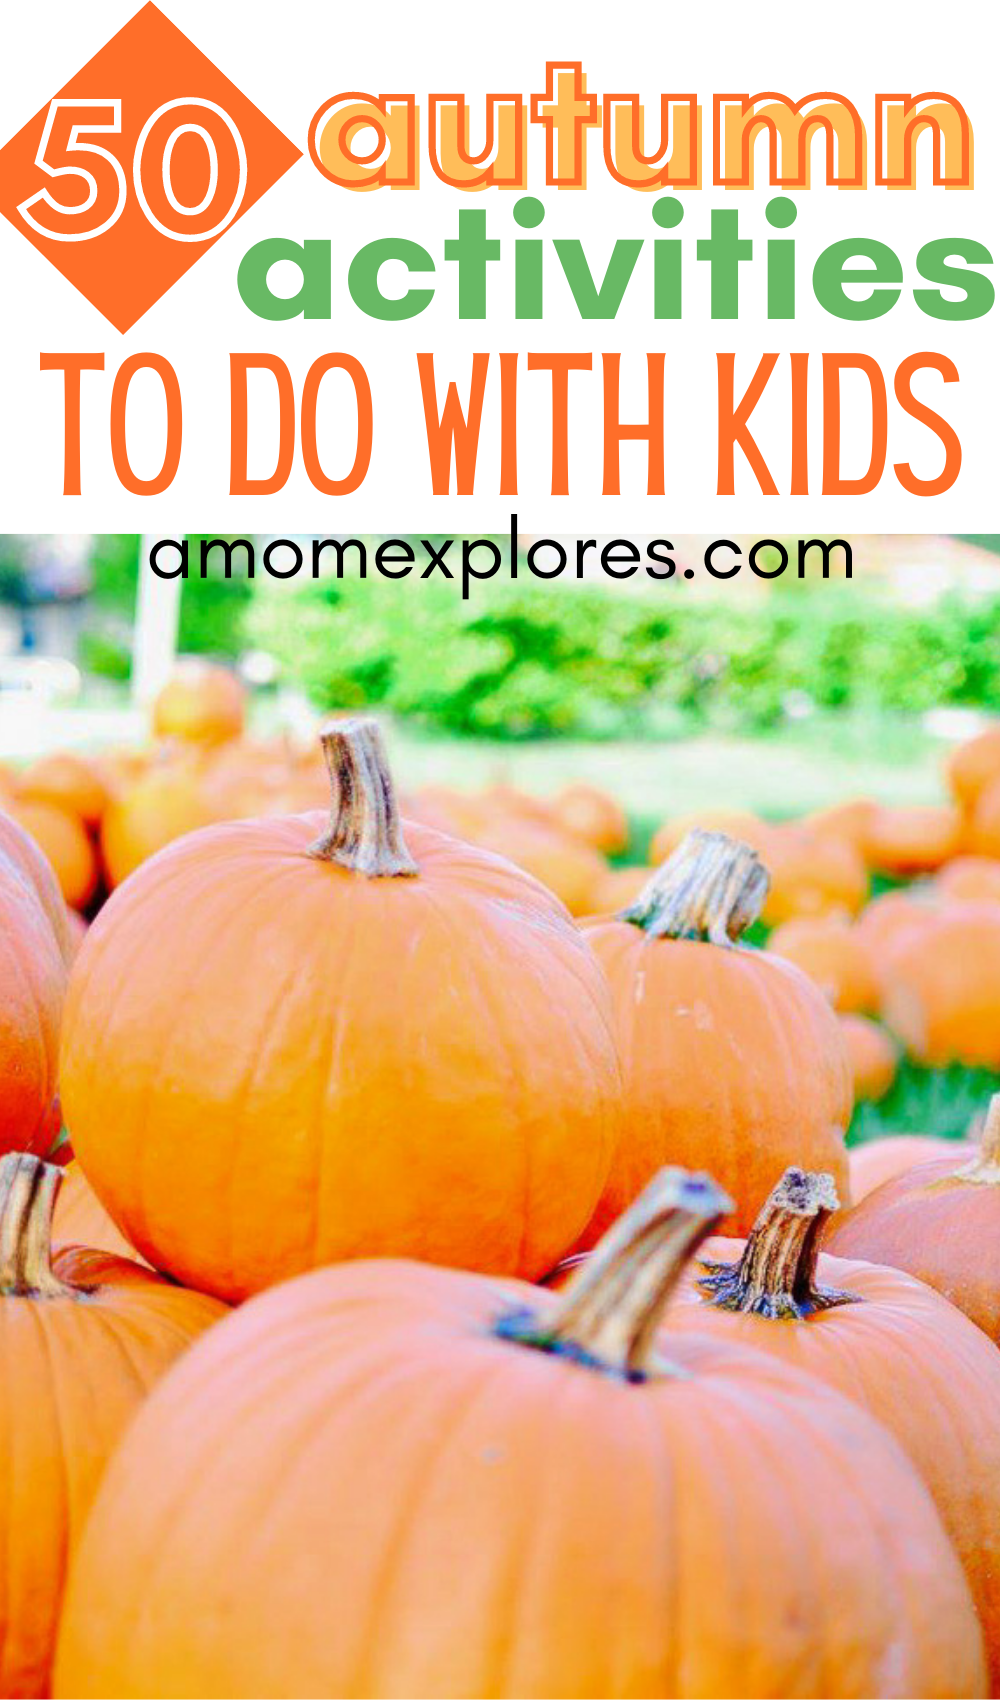 50 autumn activities to do with kids.png